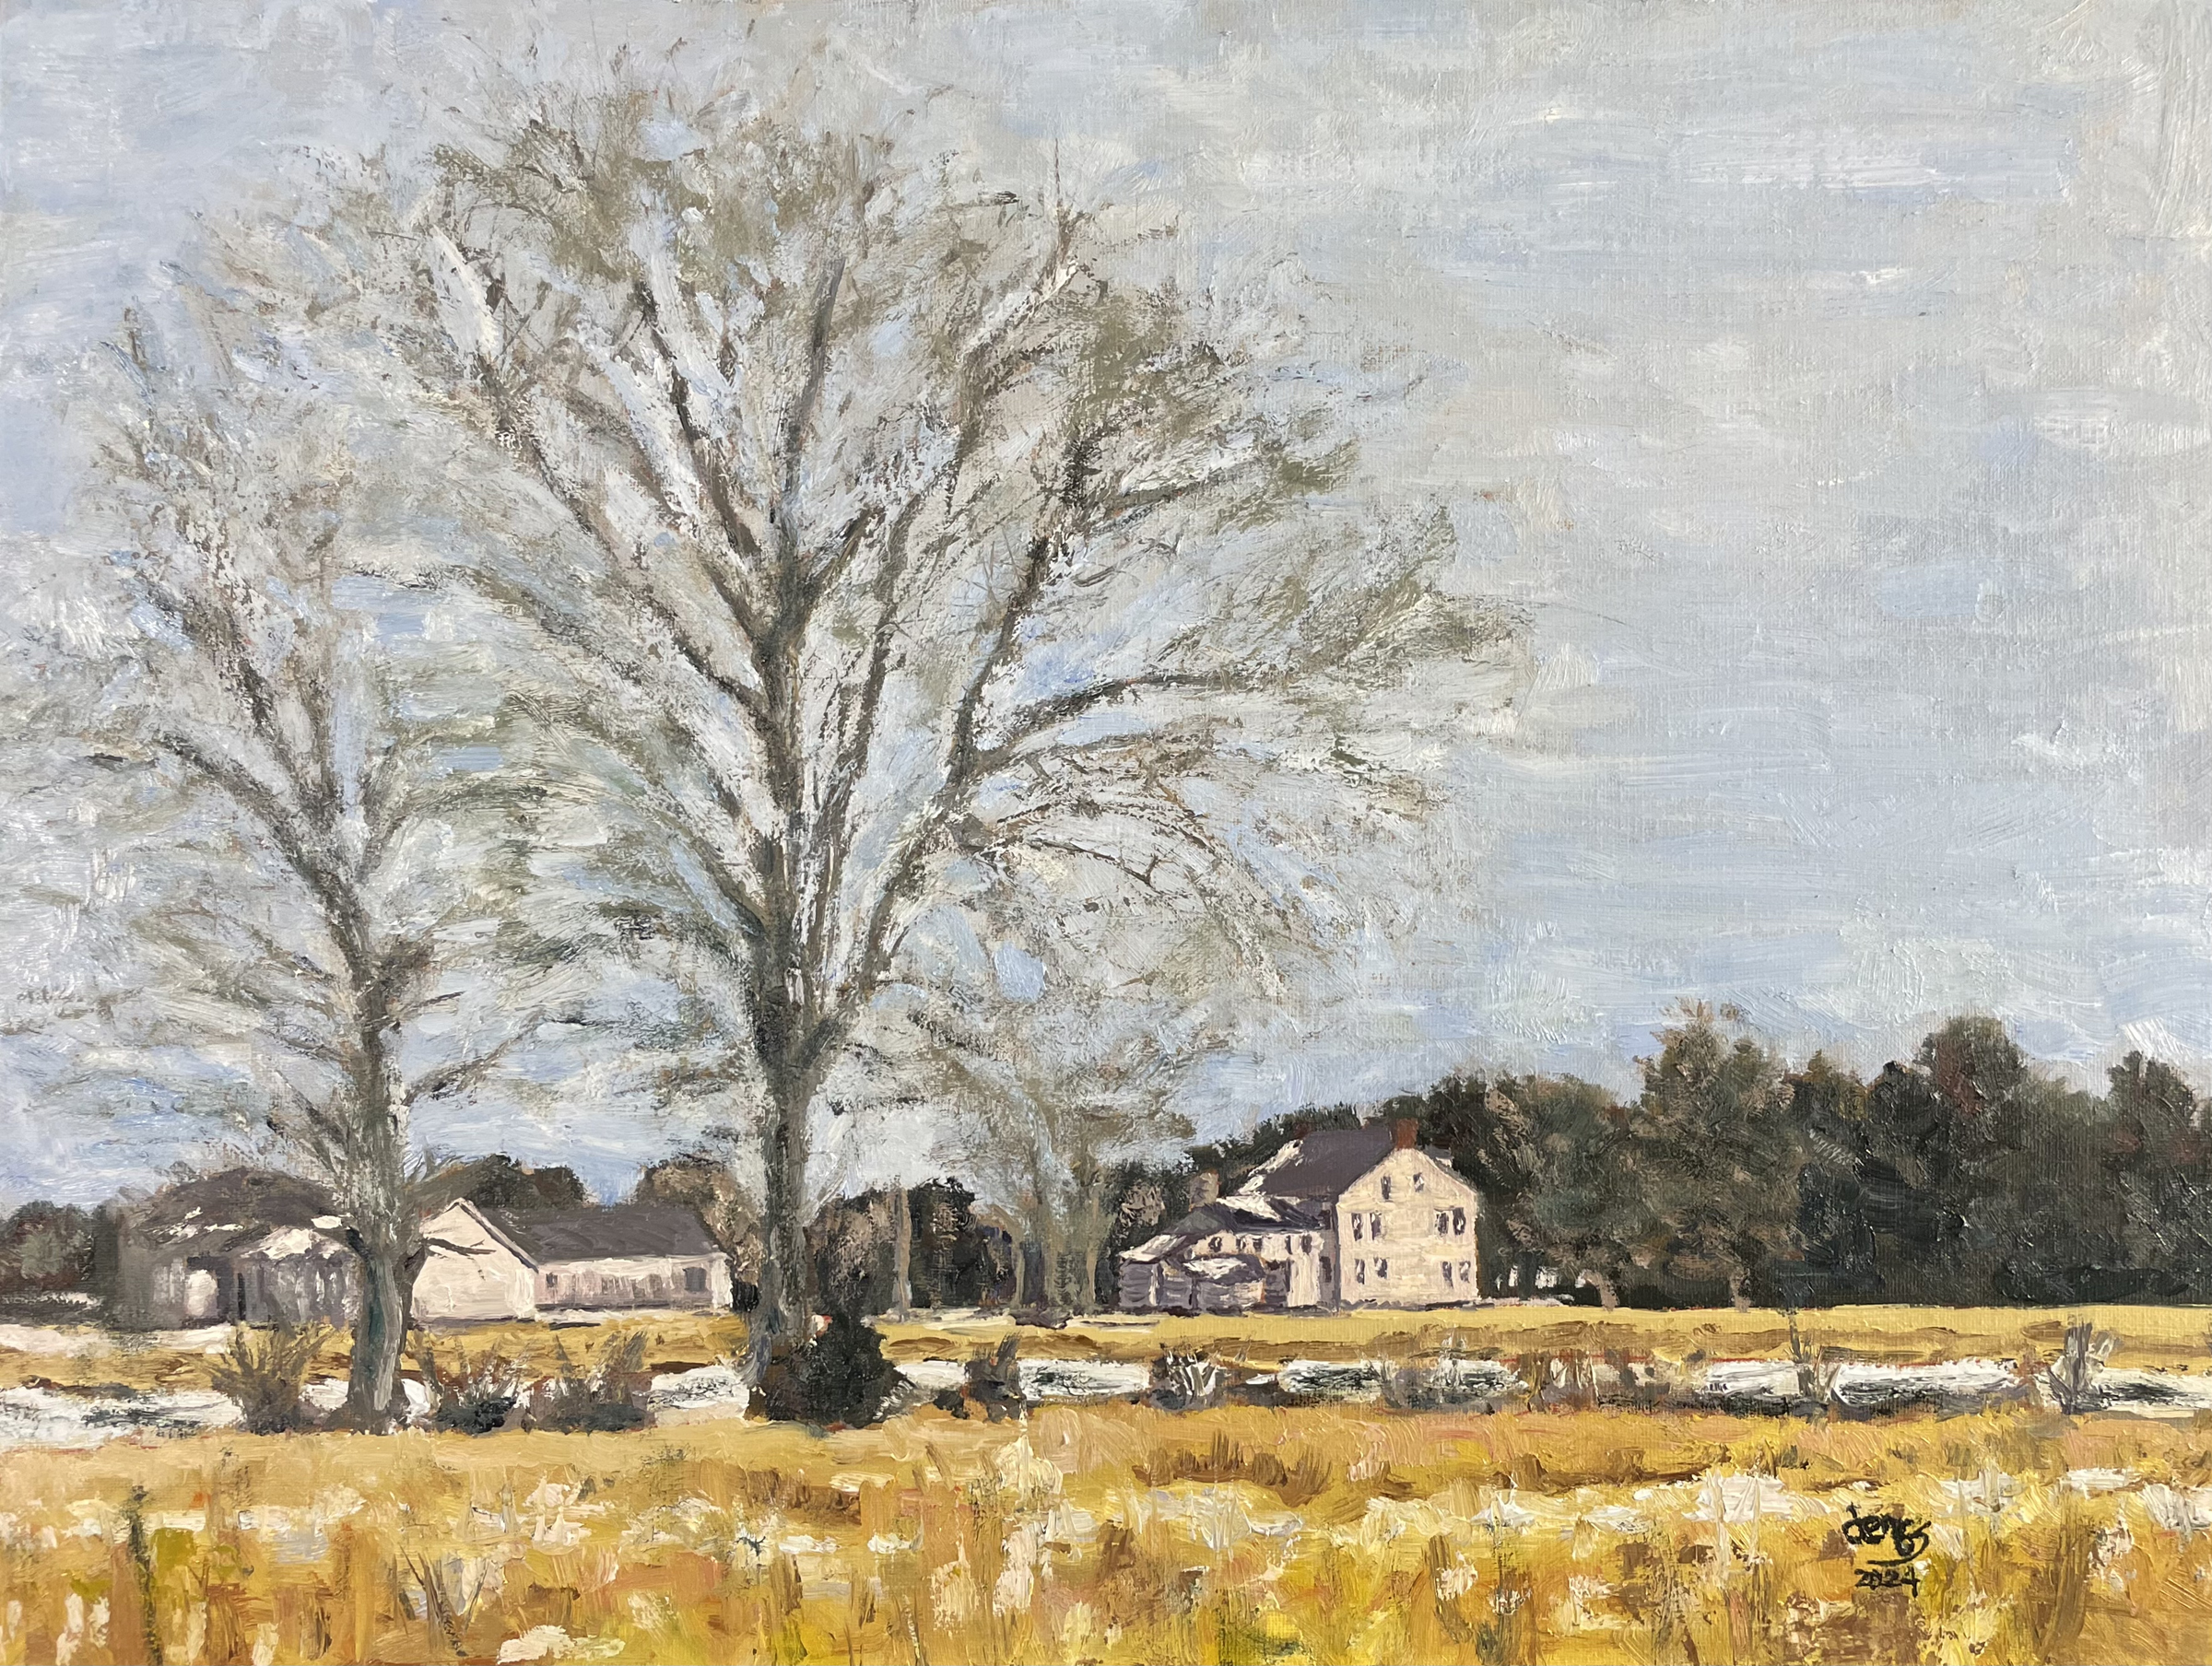 Oil painting winter landscape of farm house and outbuildings in distance, scraggly trees with no leaves in field, minimal snow on the ground and rof tops of farm buildings, evergreen trees begind the farm buildings, grey blue sky.